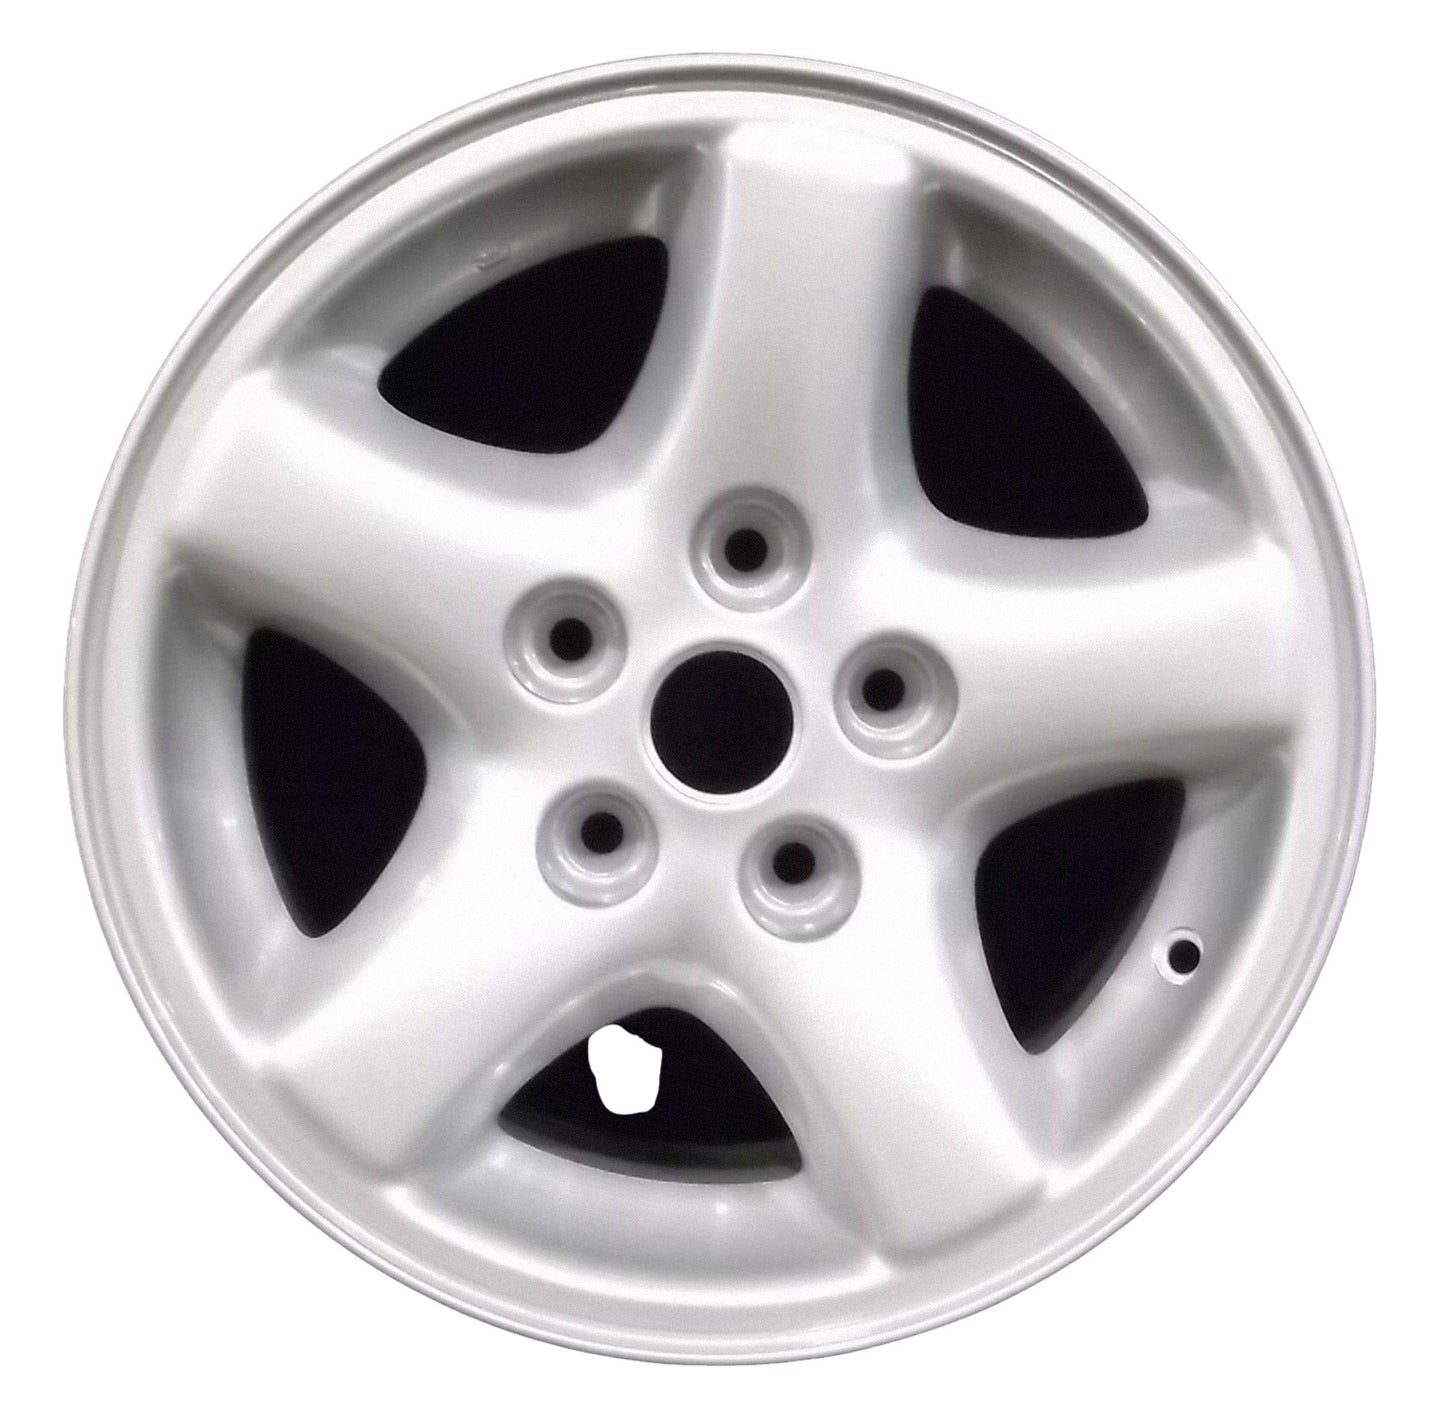 Jeep Wrangler  2002, 2003, 2004, 2005, 2006 Factory OEM Car Wheel Size 15x7 Alloy WAO.9018A.PS08.FF